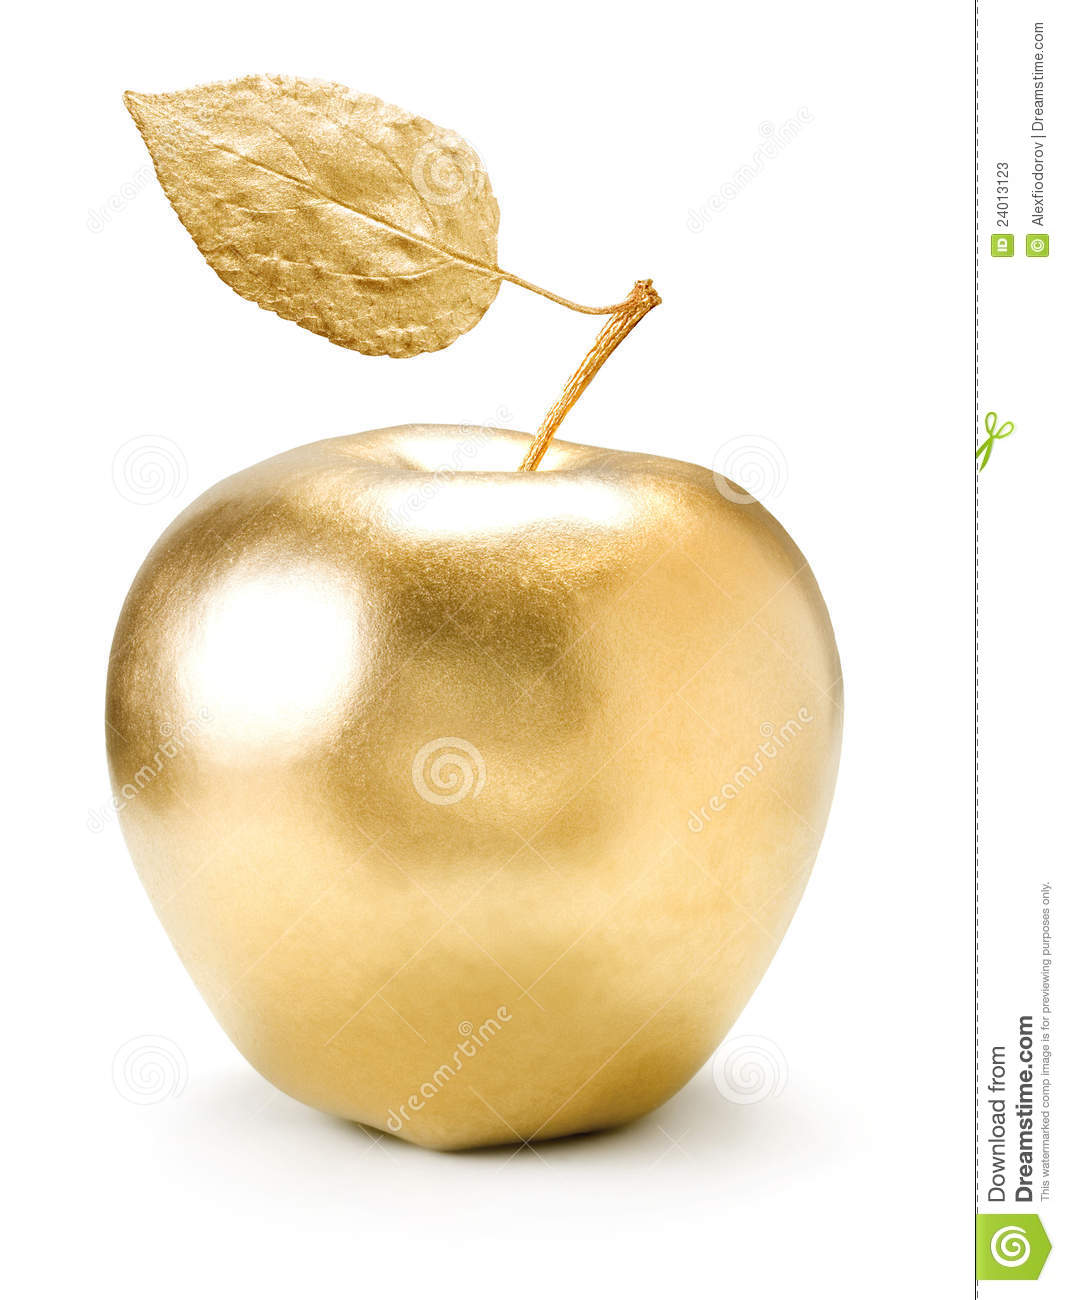 Apples Of Gold Quotes. QuotesGram